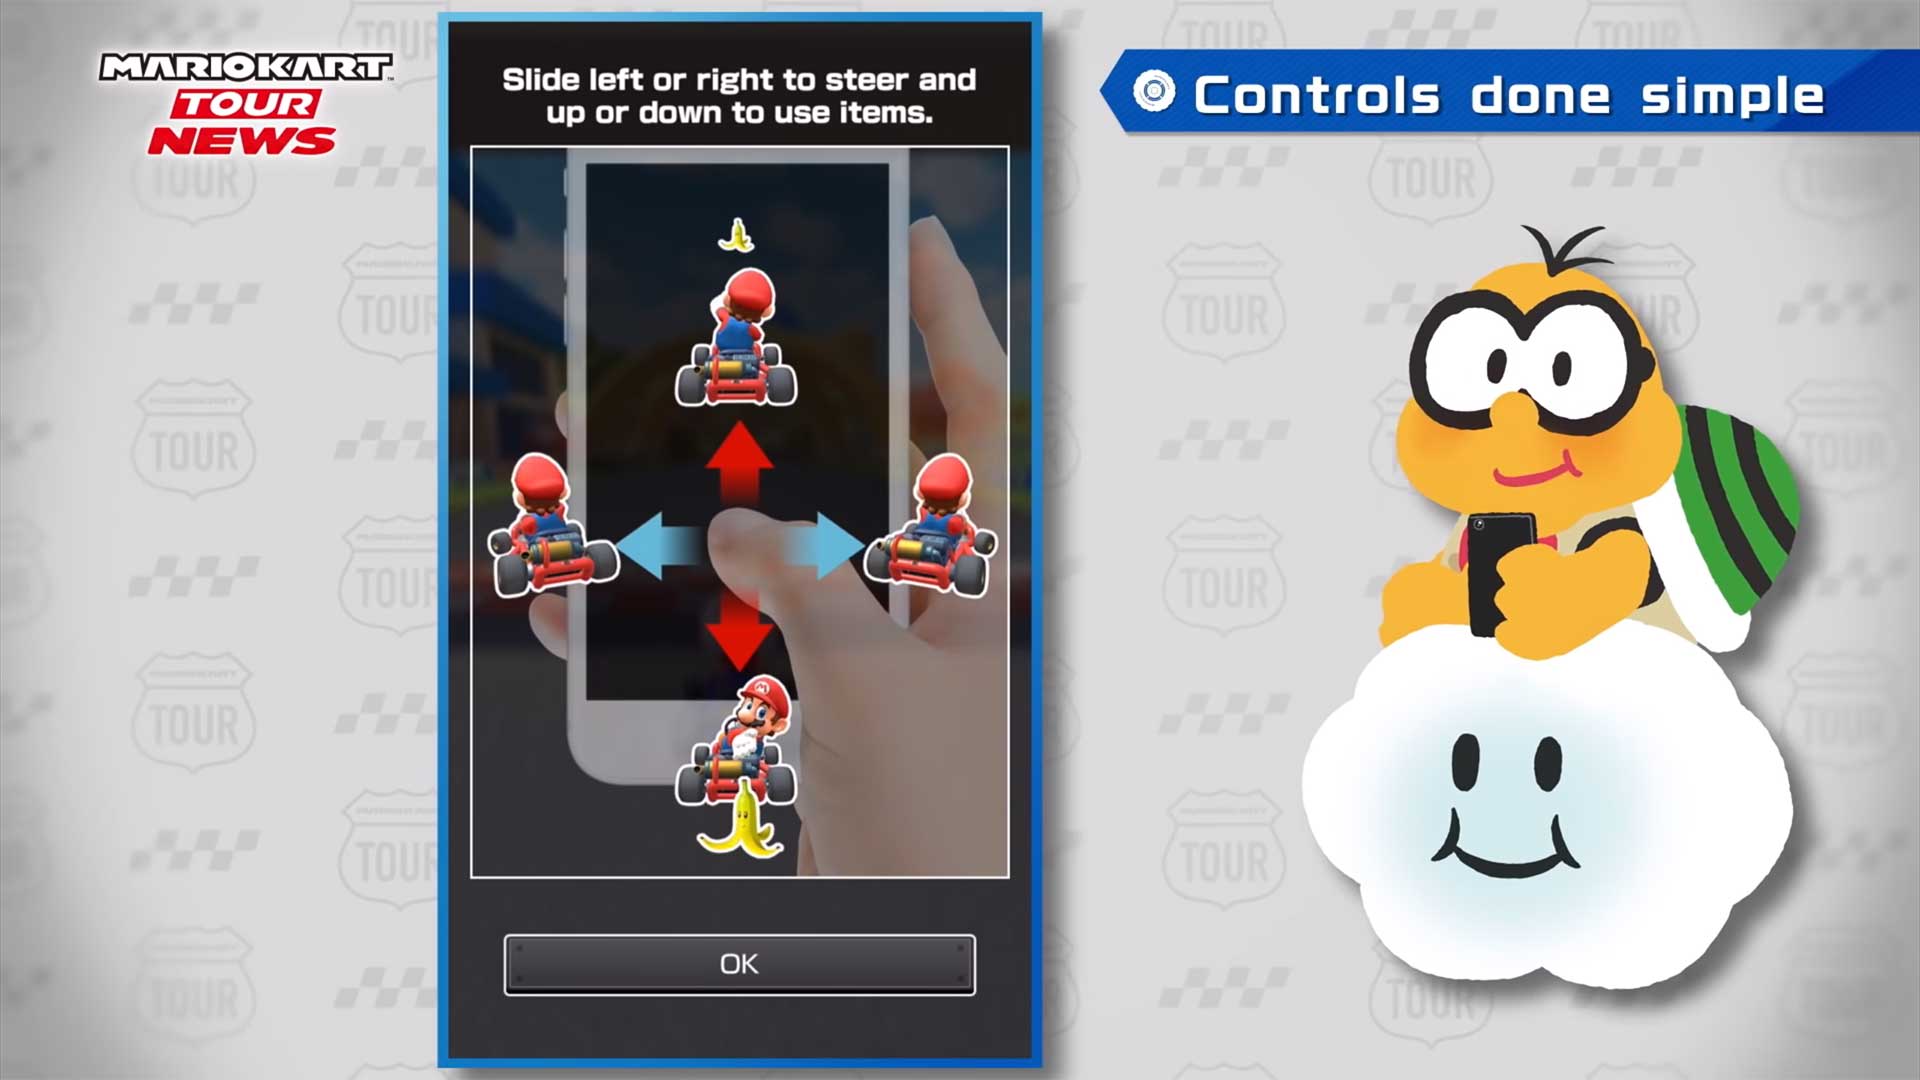 Mario Kart Tour guide – Are you racing against real players or bots?